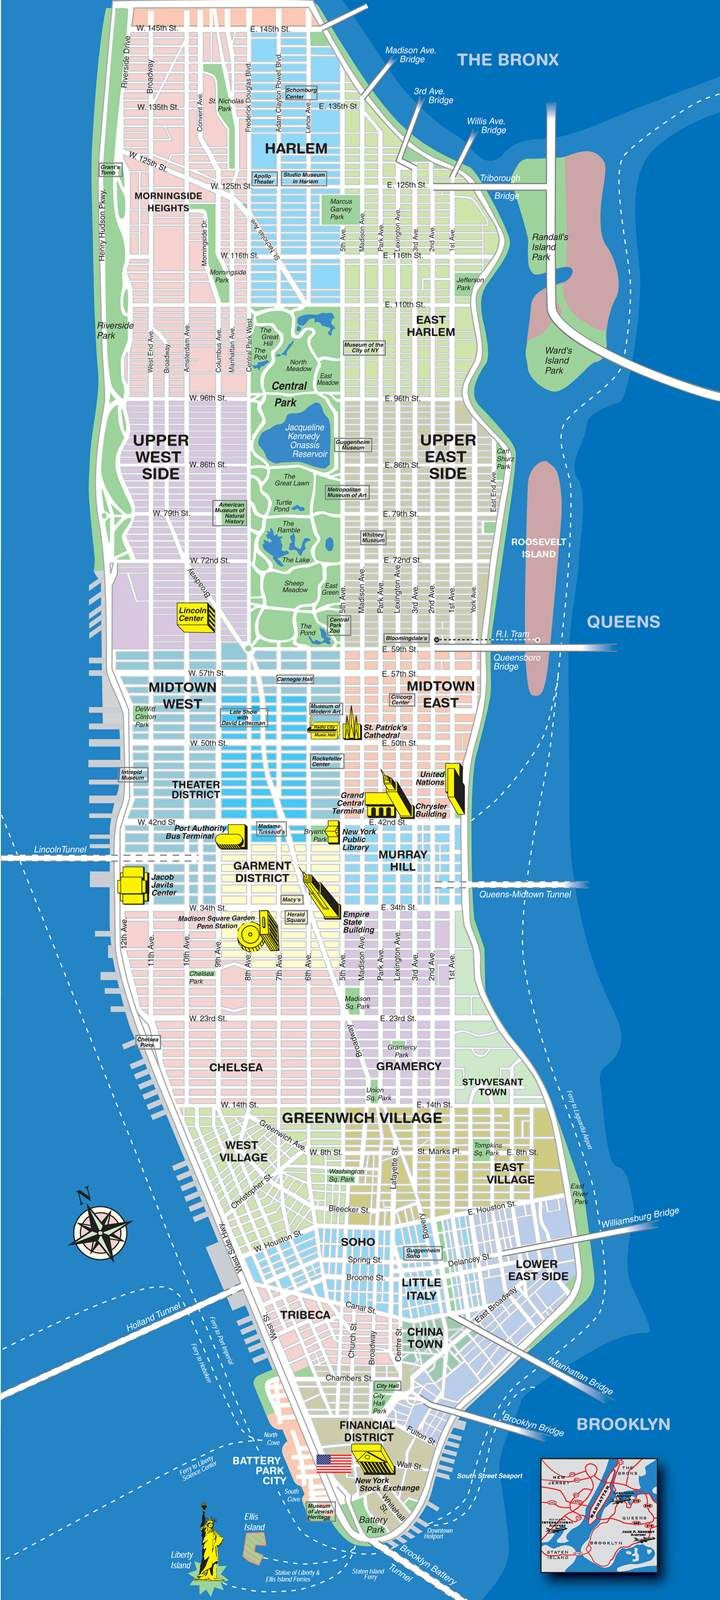 High-Resolution Map Of Manhattan For Print Or Download | Usa Travel - Printable Map Of Lower Manhattan Streets